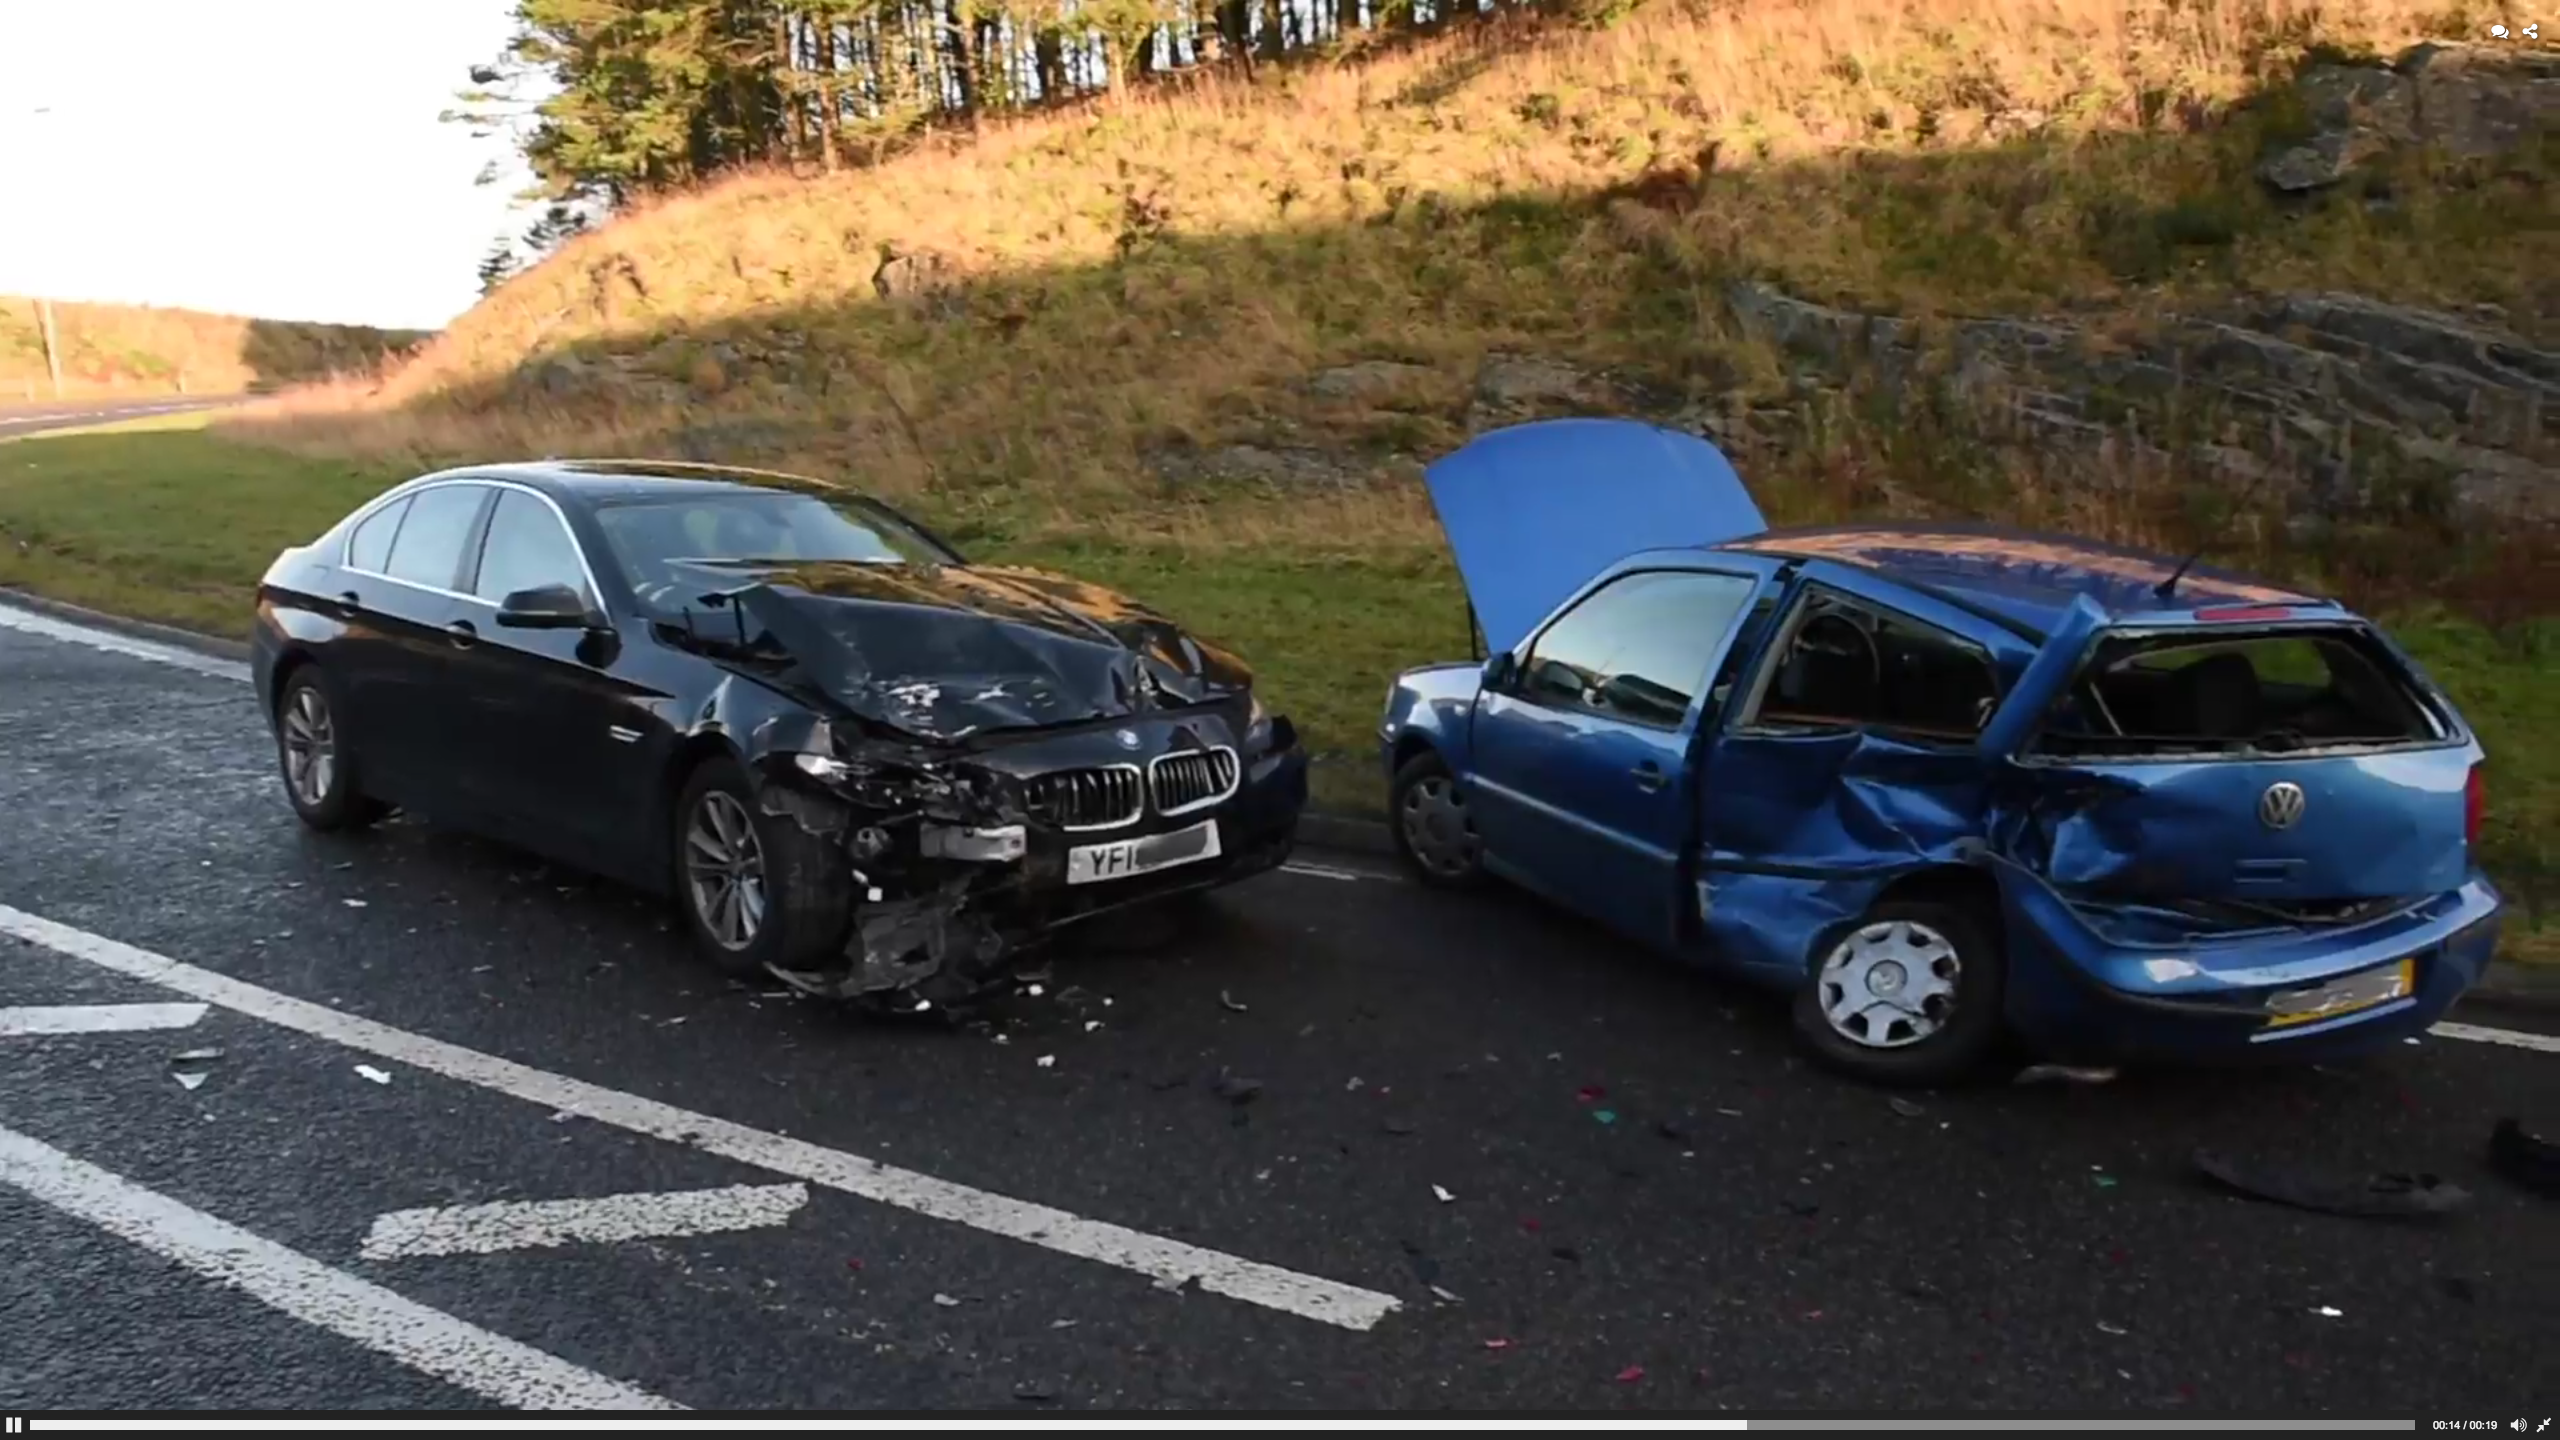 Scene of the crash on the A90